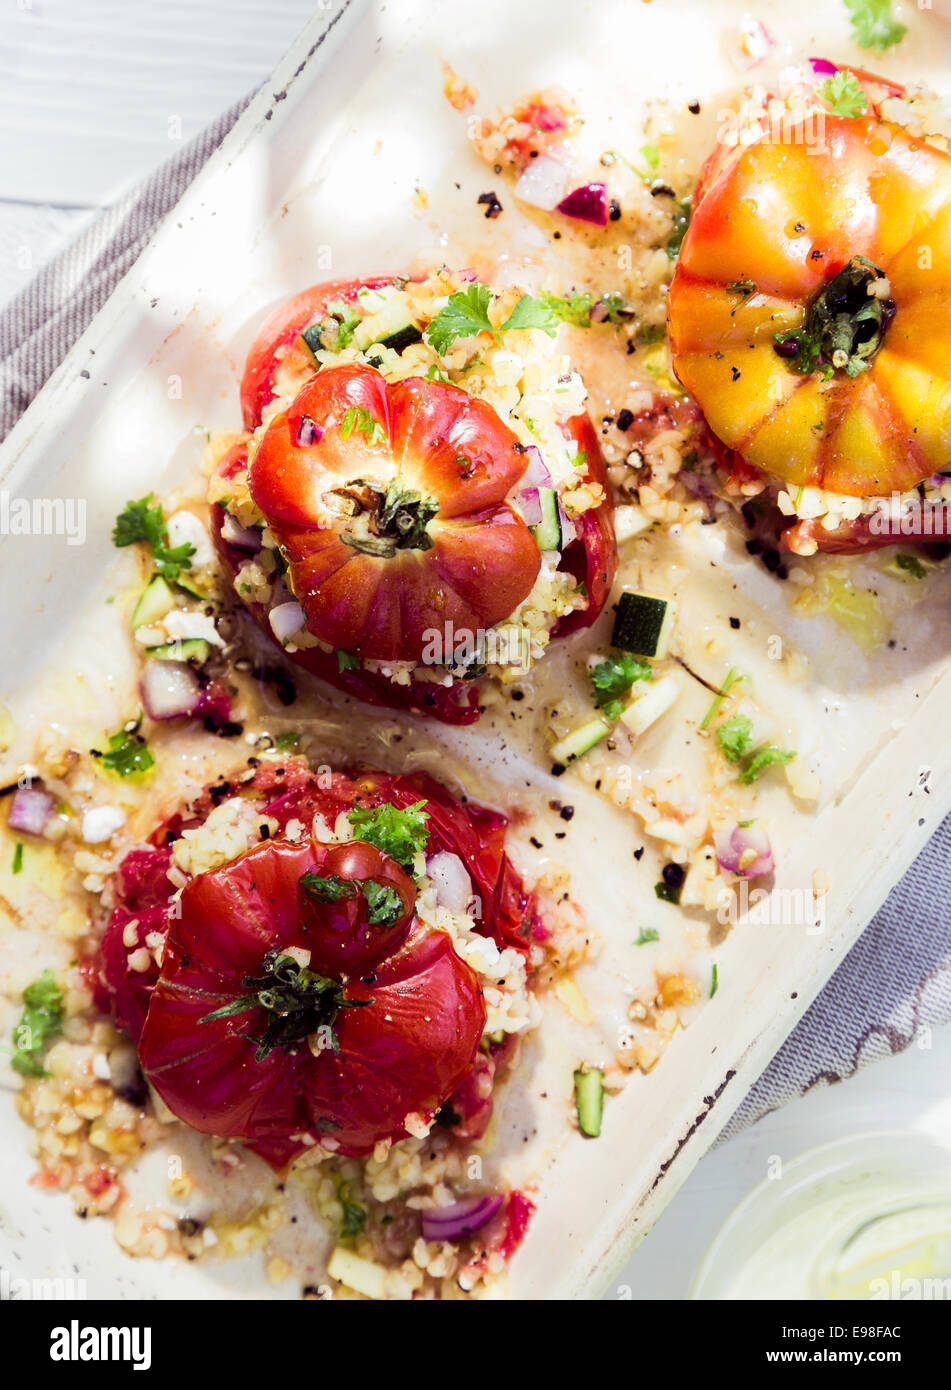 Cooked baked tomatoes with fresh herbs and savory grain stuffing on a platter for a tasty nutritious, appetizer or accompaniment to a meal Stock Photo